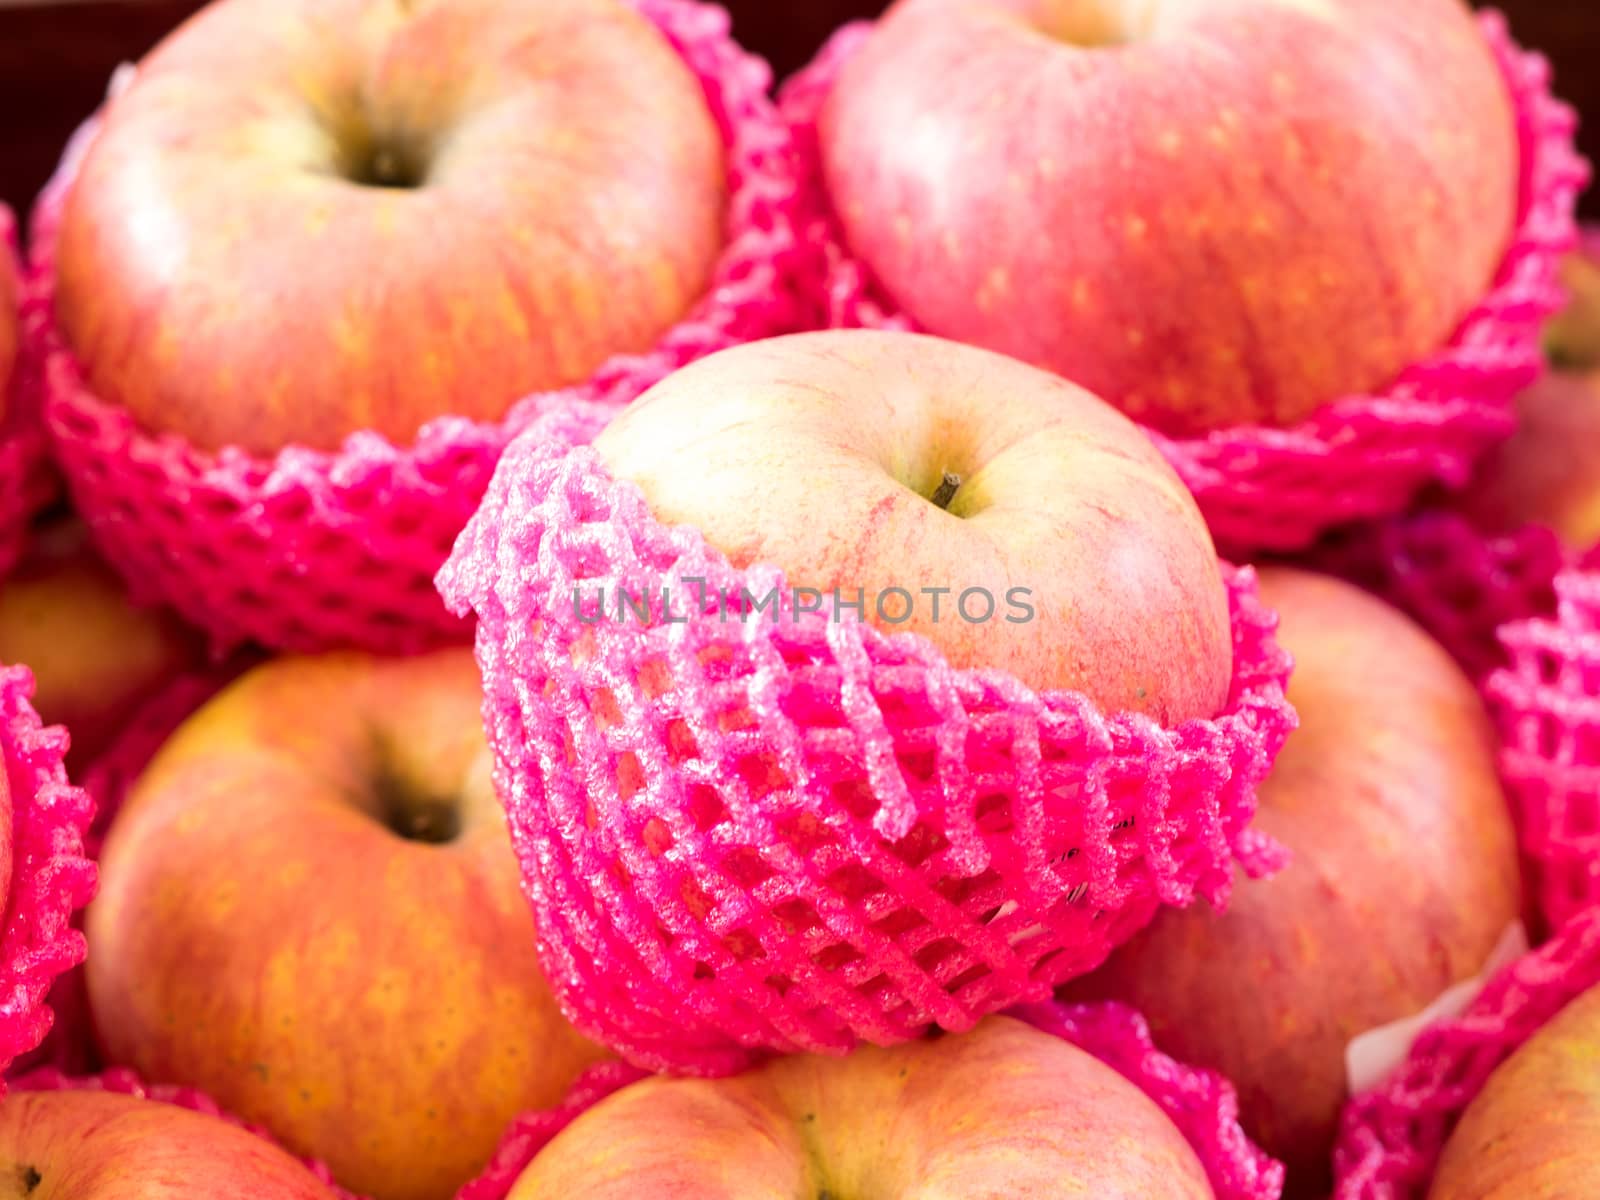 Apple wrapped with foam fruit net,select focus